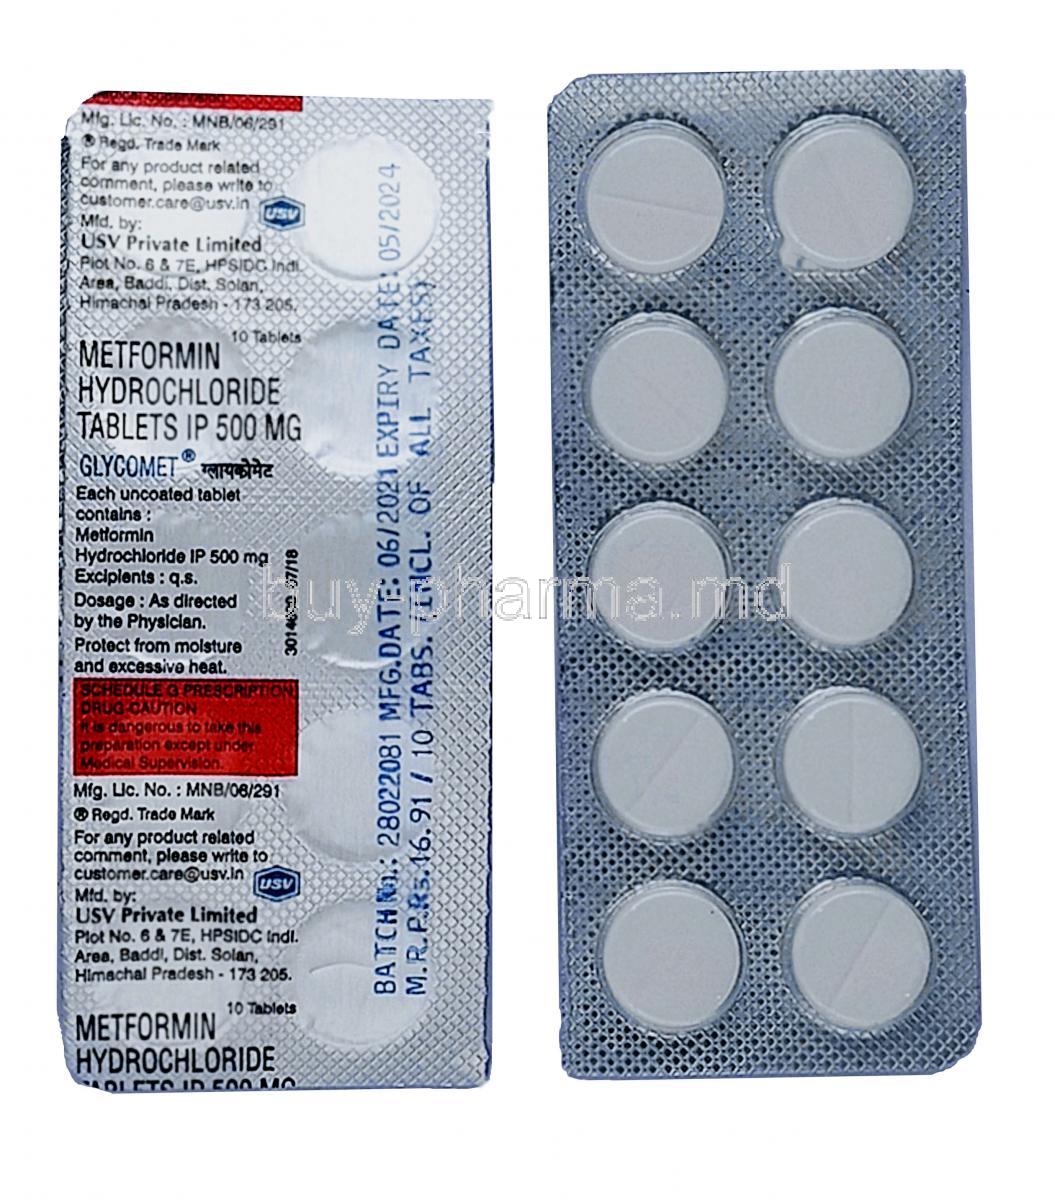 Glycomet, Metformin 250mg, Tablet, USV,Blister pack front and back view